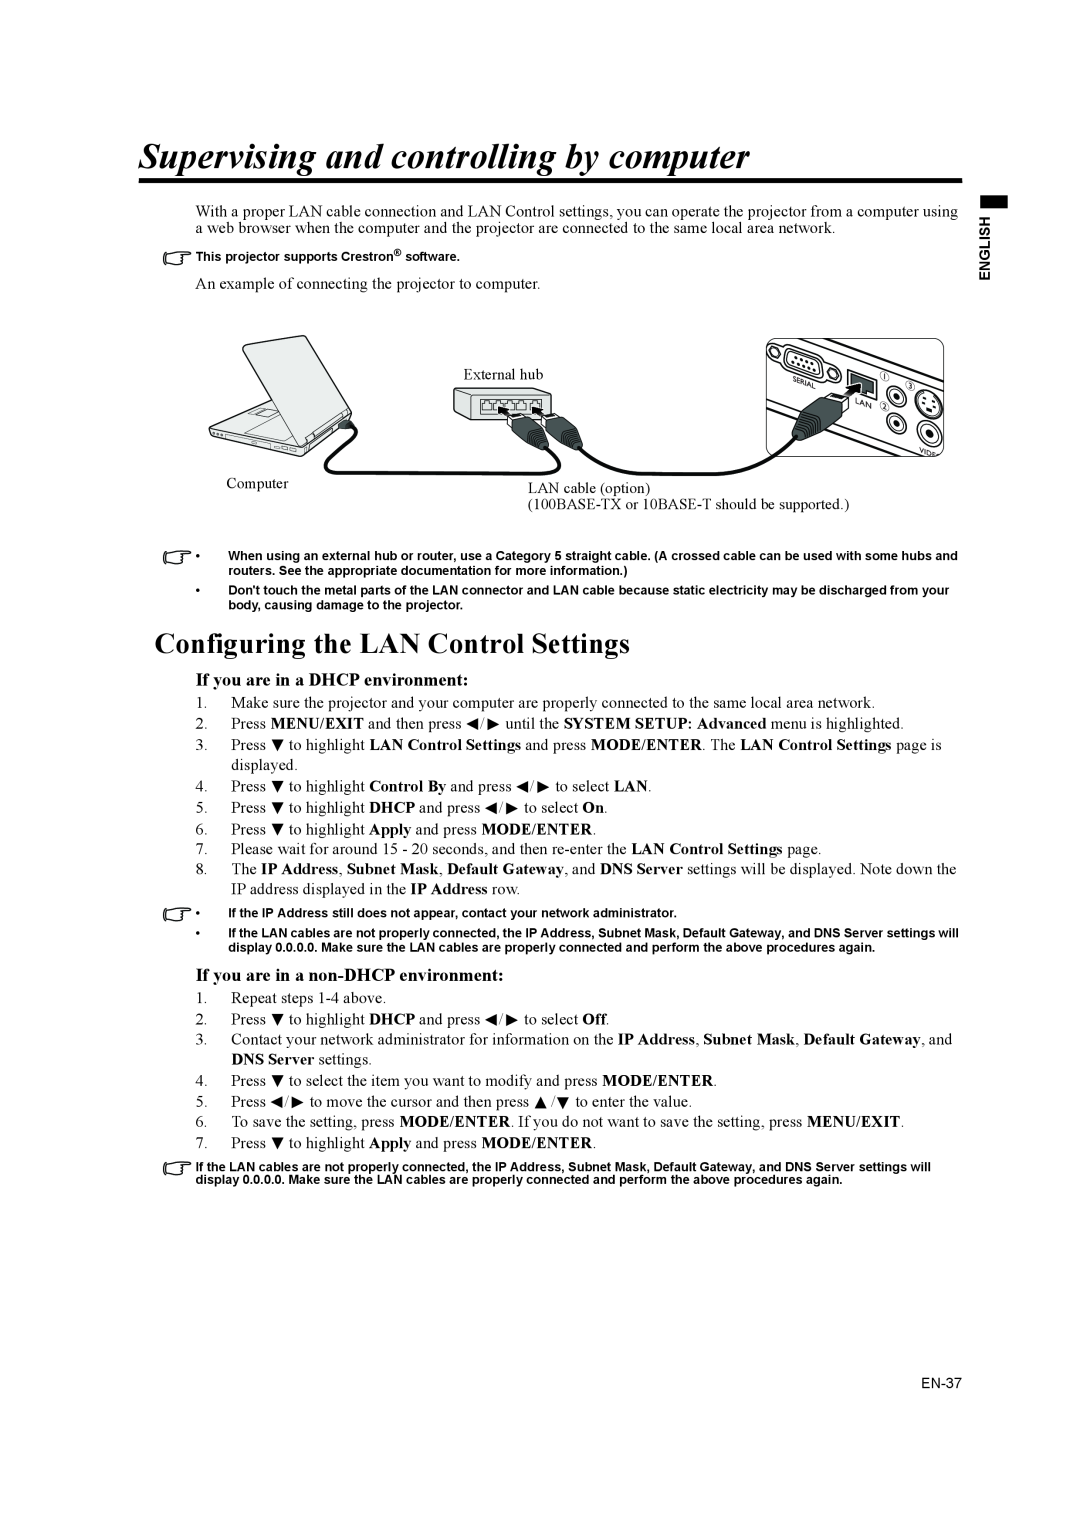 Mitsubishi Electronics EW270U user manual Supervising and controlling by computer, Configuring the LAN Control Settings 